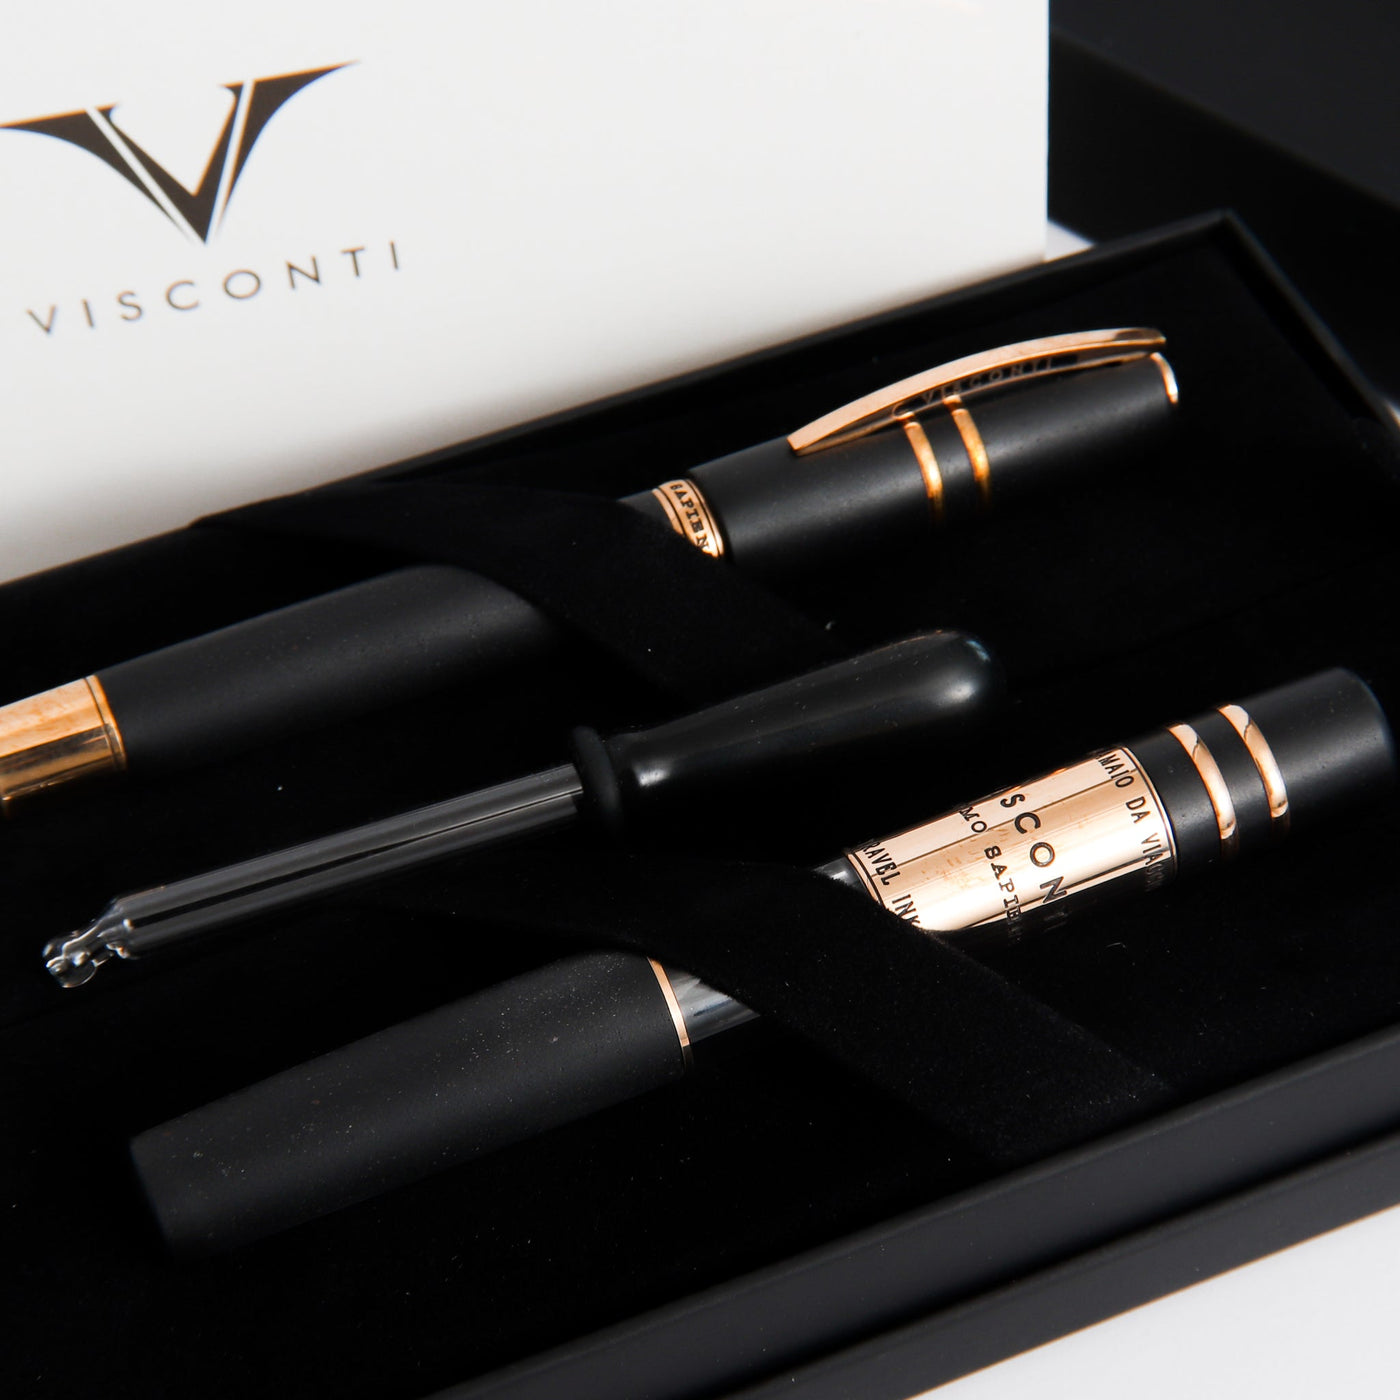 Visconti Homo Sapiens Bronze Age Travel Edition Fountain Pen With Eyedropper And Travel Ink Pot